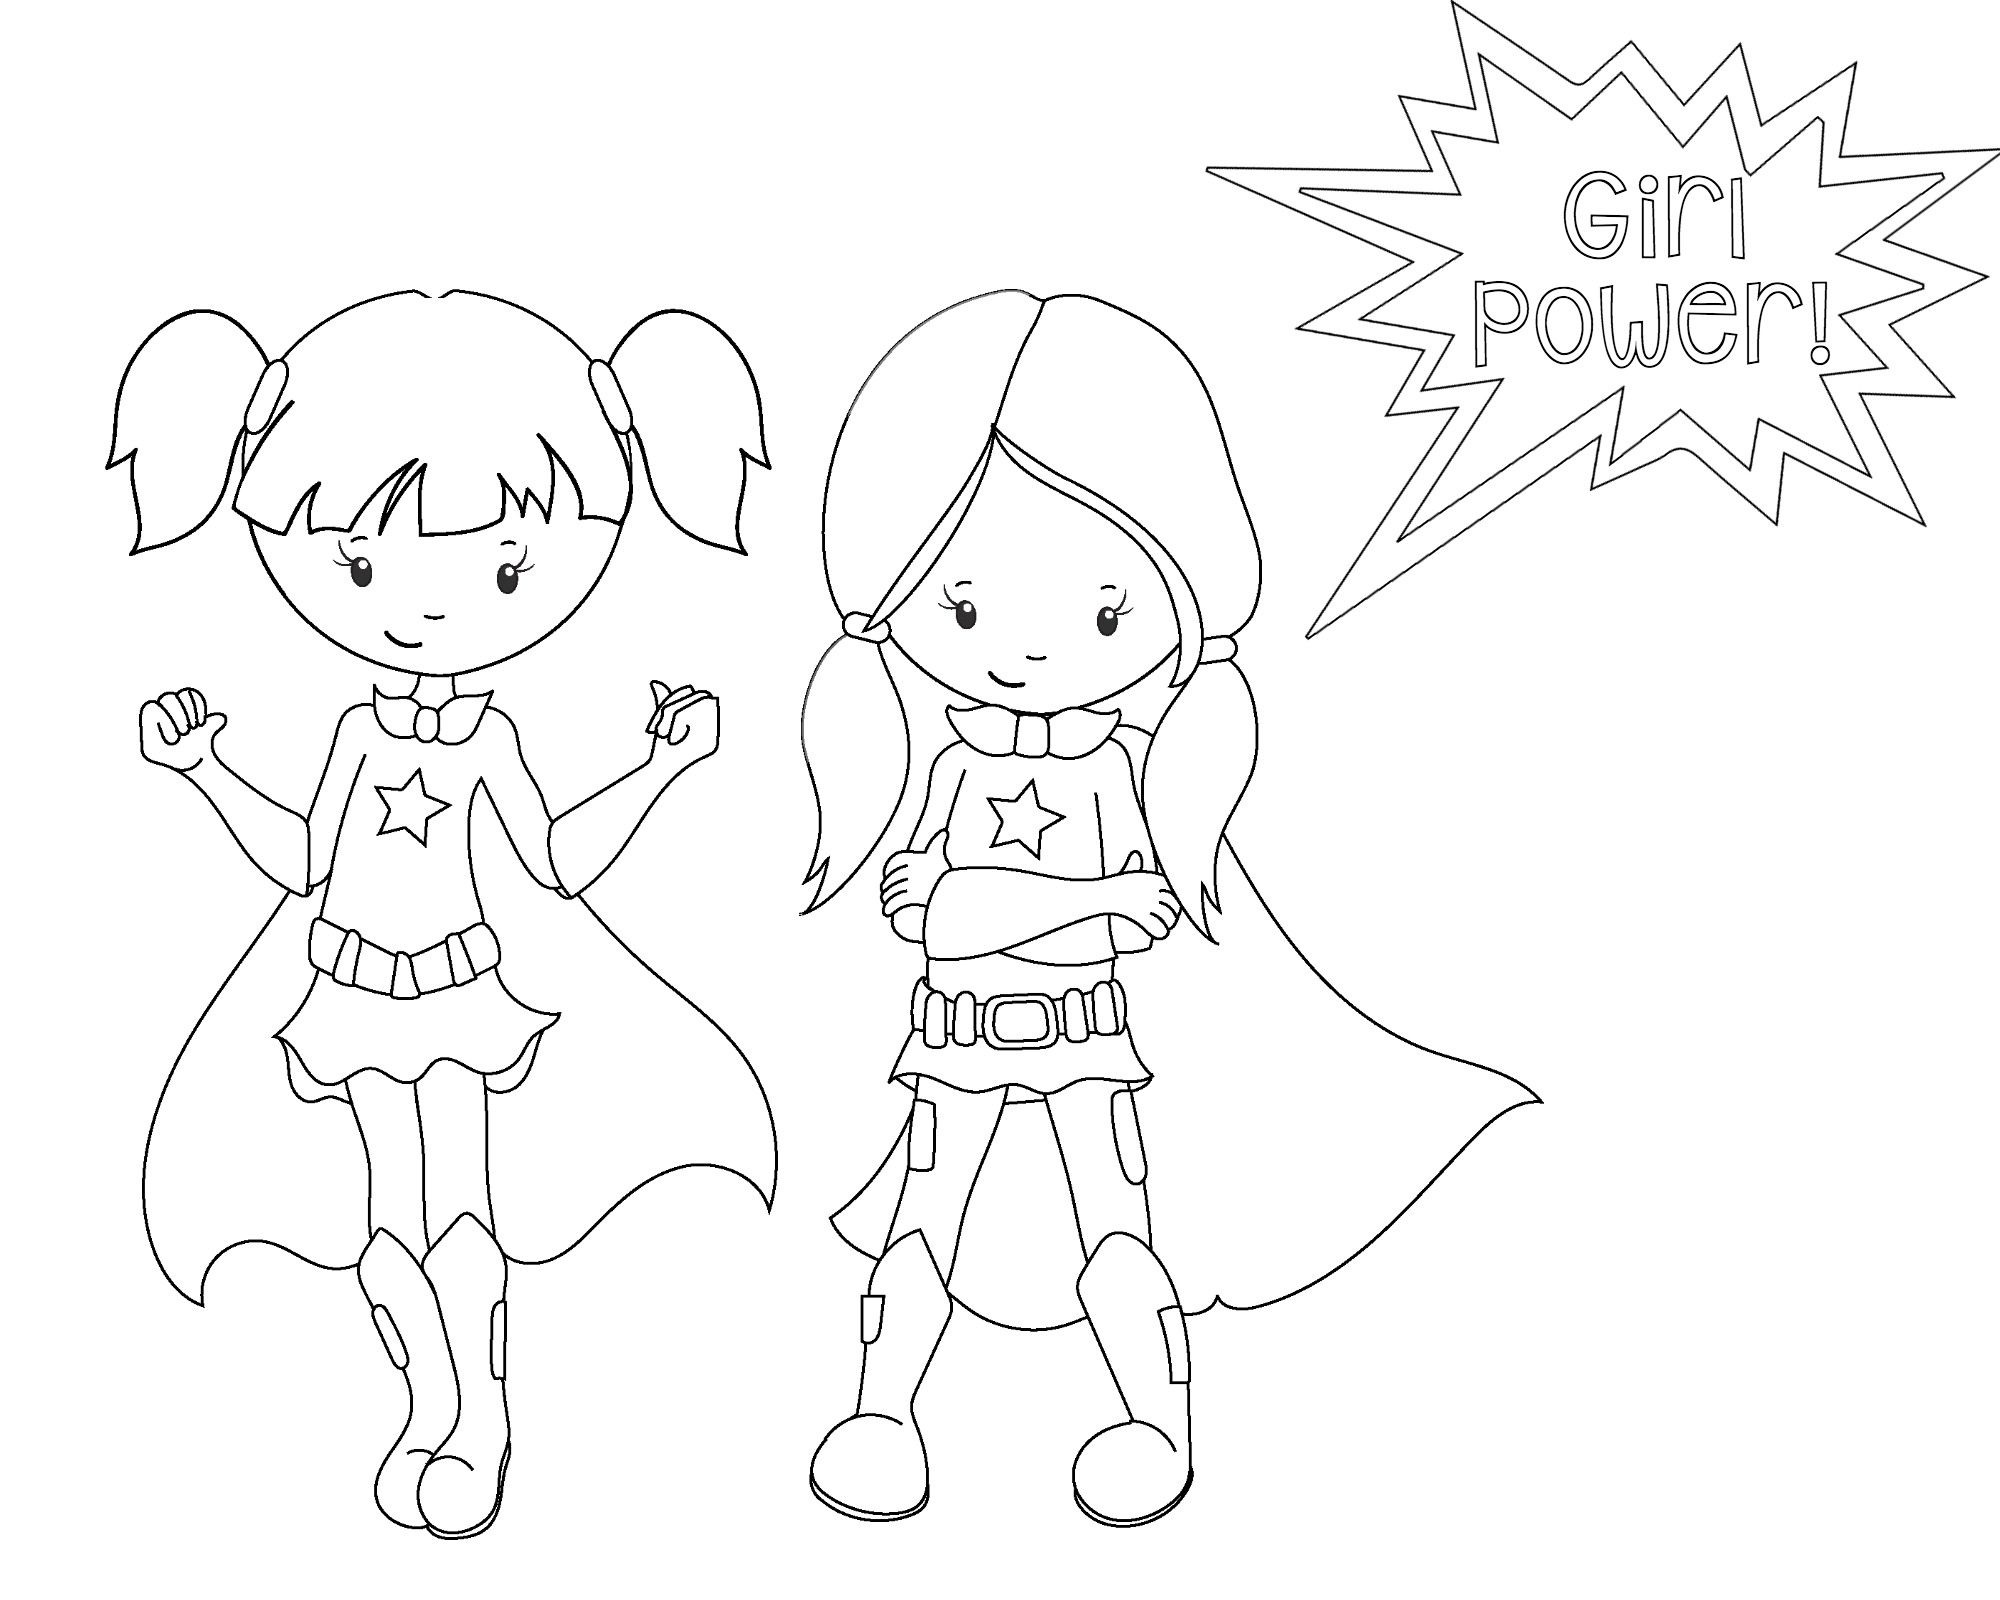 hero-coloring-pages-at-getdrawings-free-download